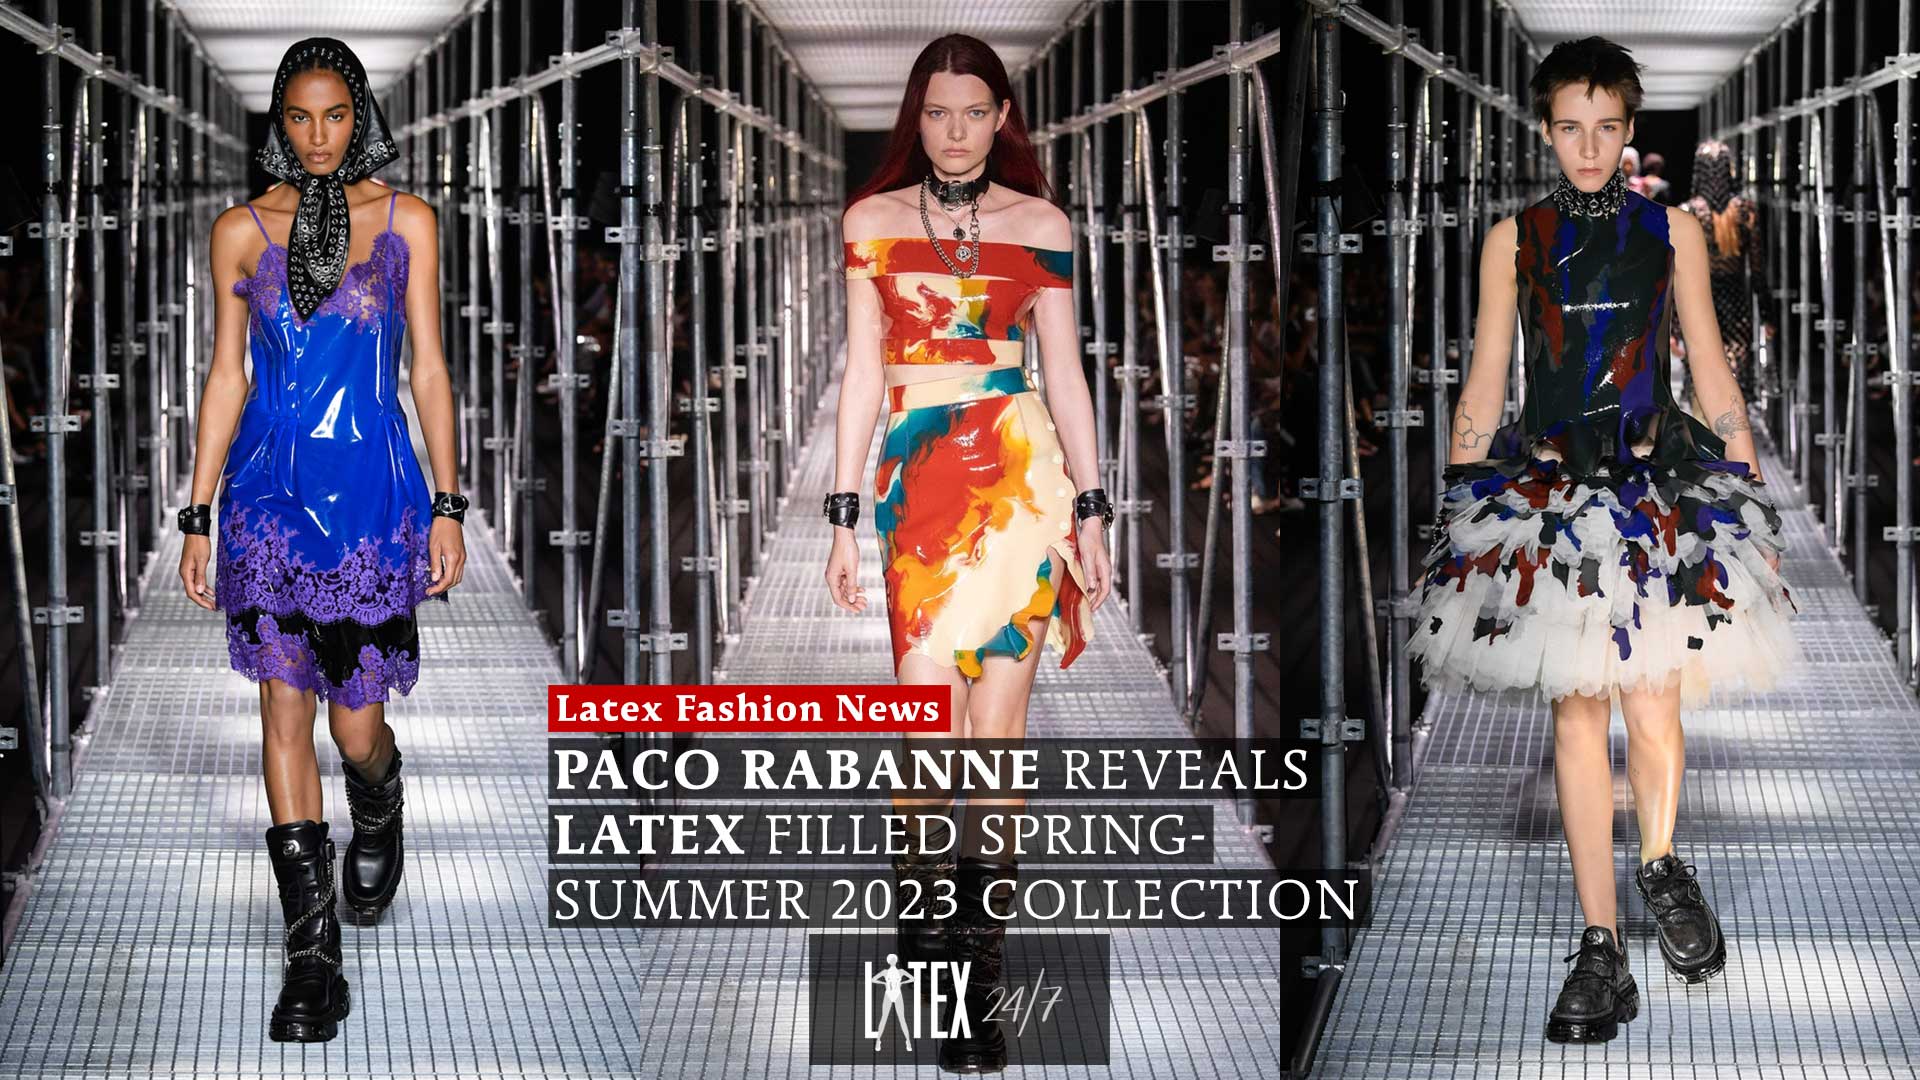 Paco Rabanne Reveals Latex Filled SS23 Collection - Latex24/7